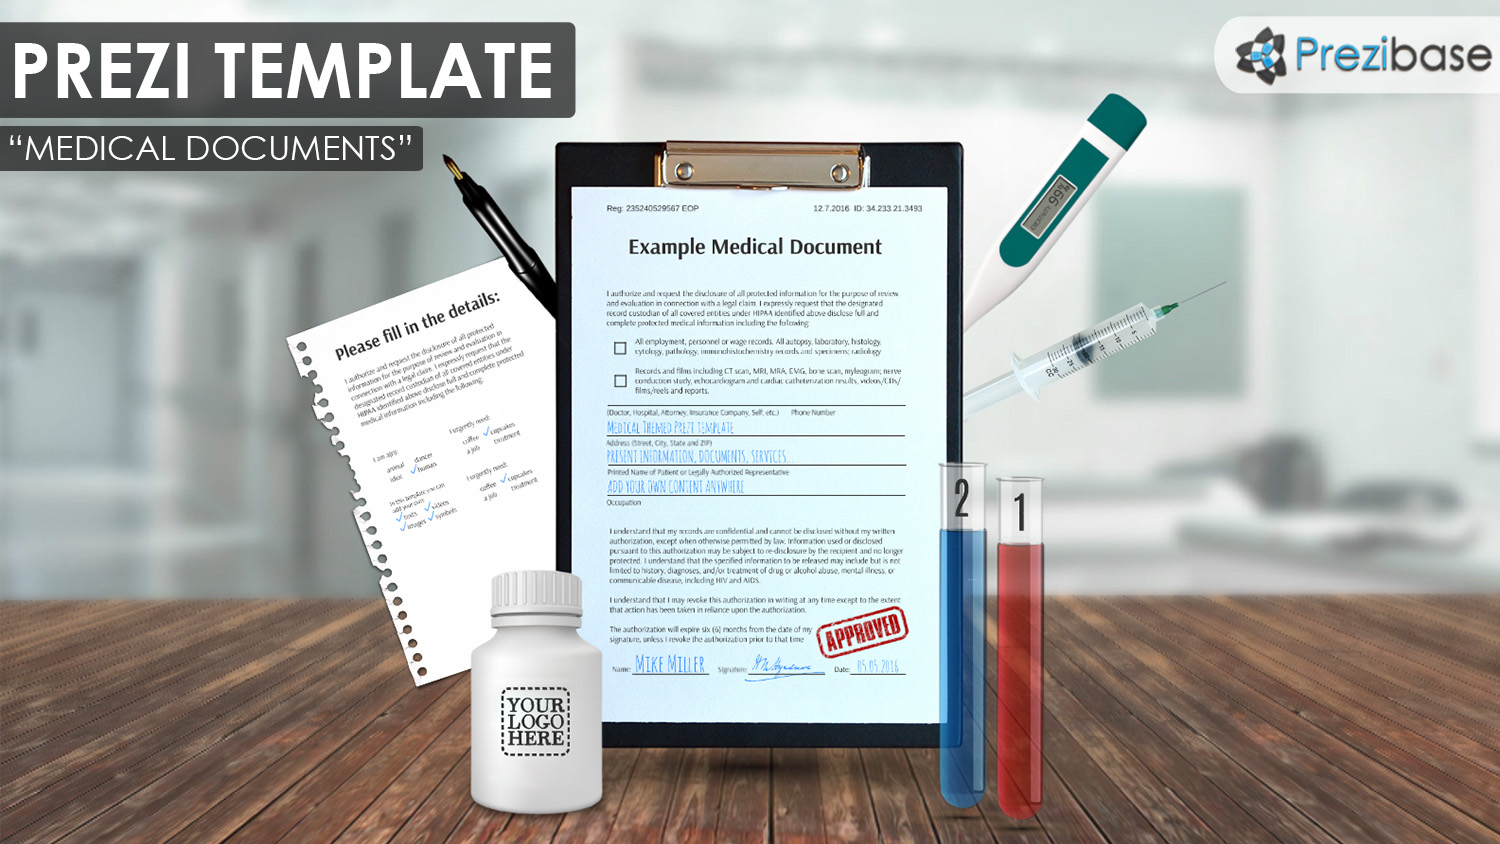 Medical and Healthcare documents in hospital prezi template